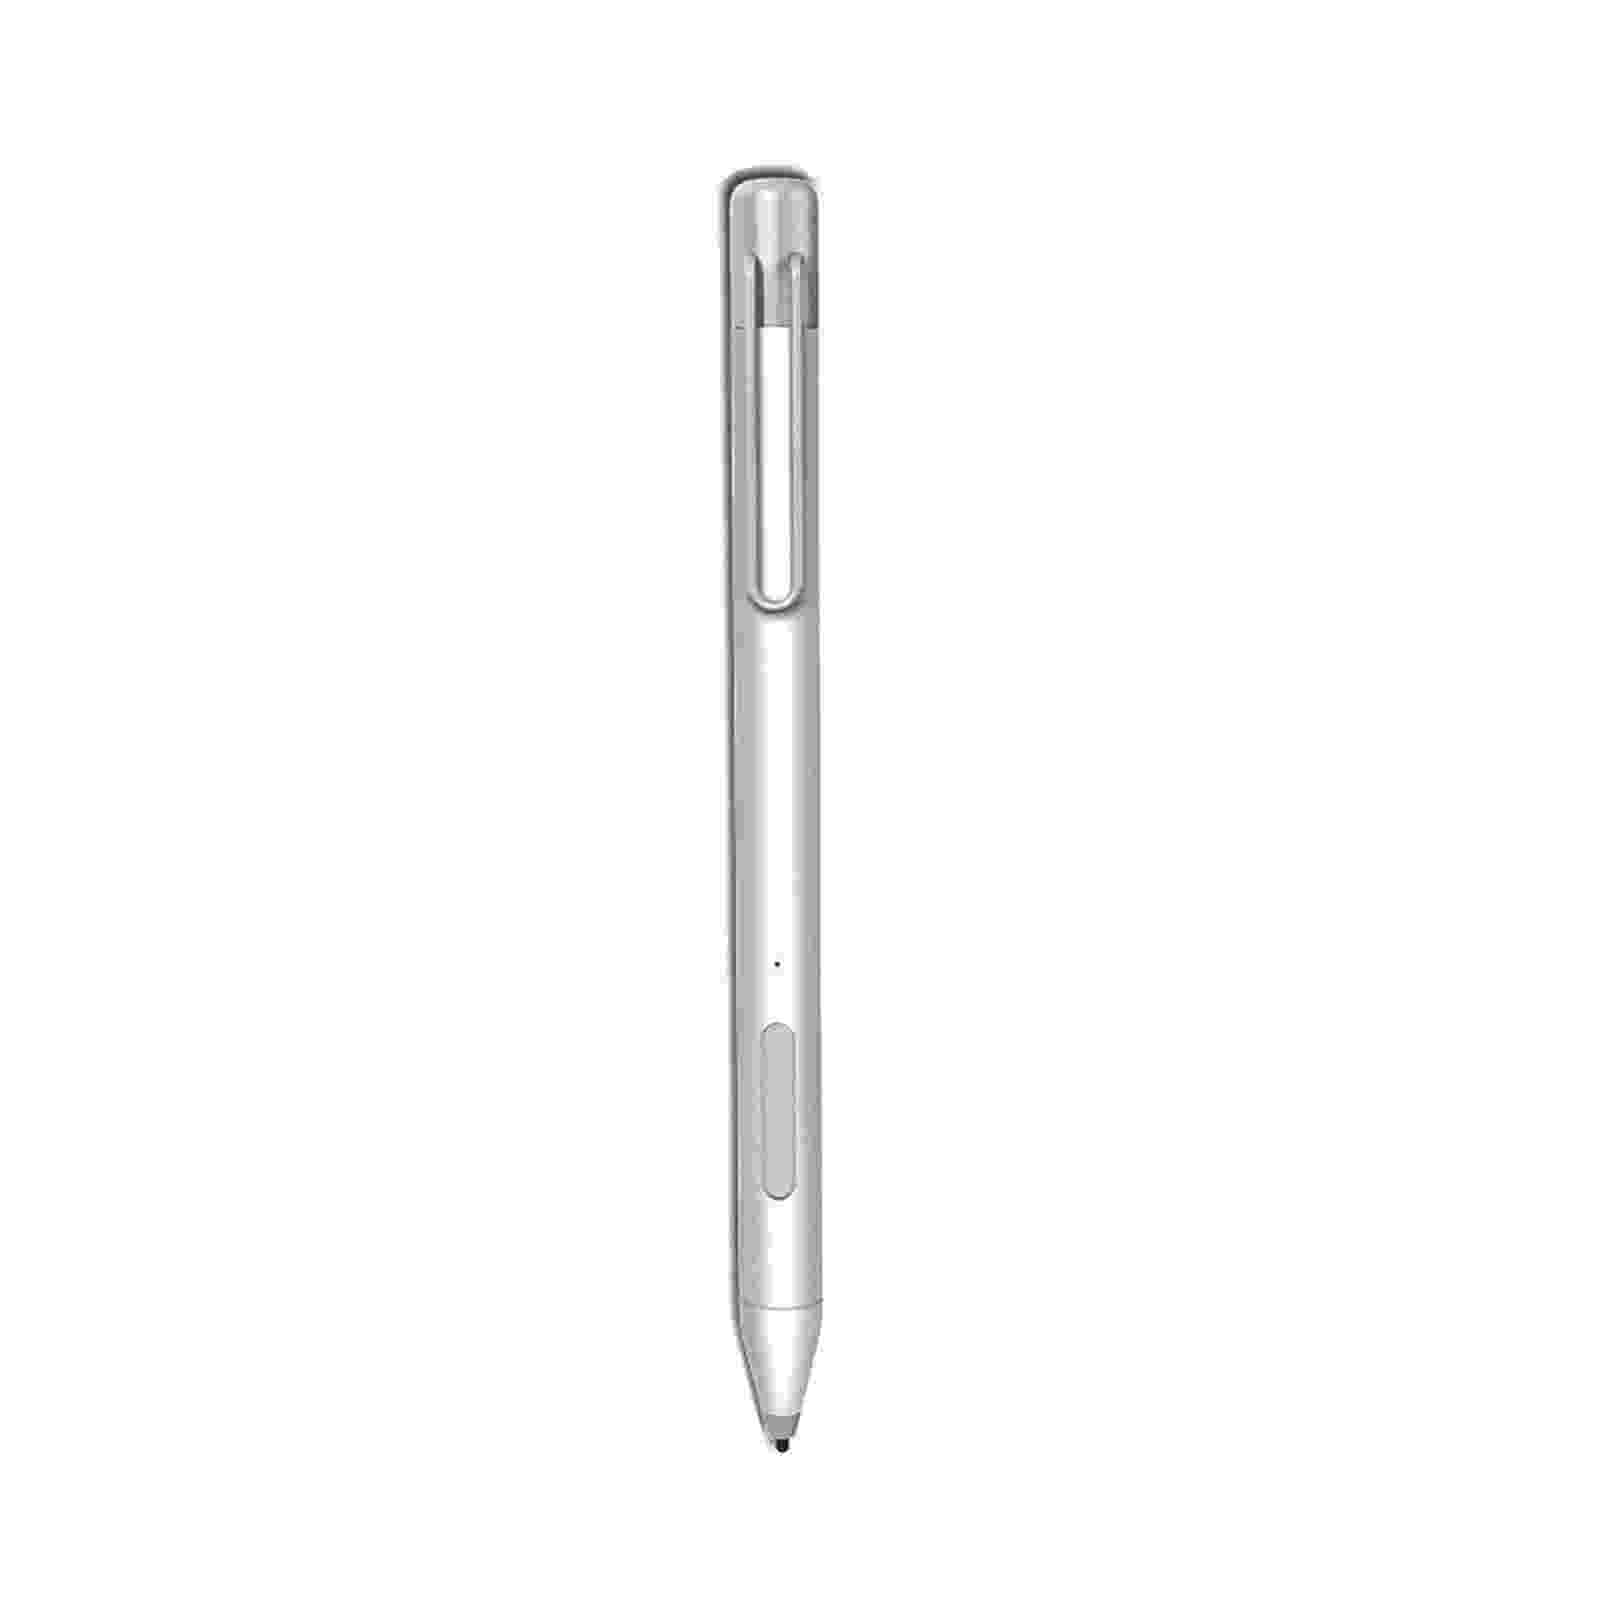 coloring book for surface pro 3 replacement smart stylus pen for surface 3 pro 543 go surface for 3 coloring pro book 